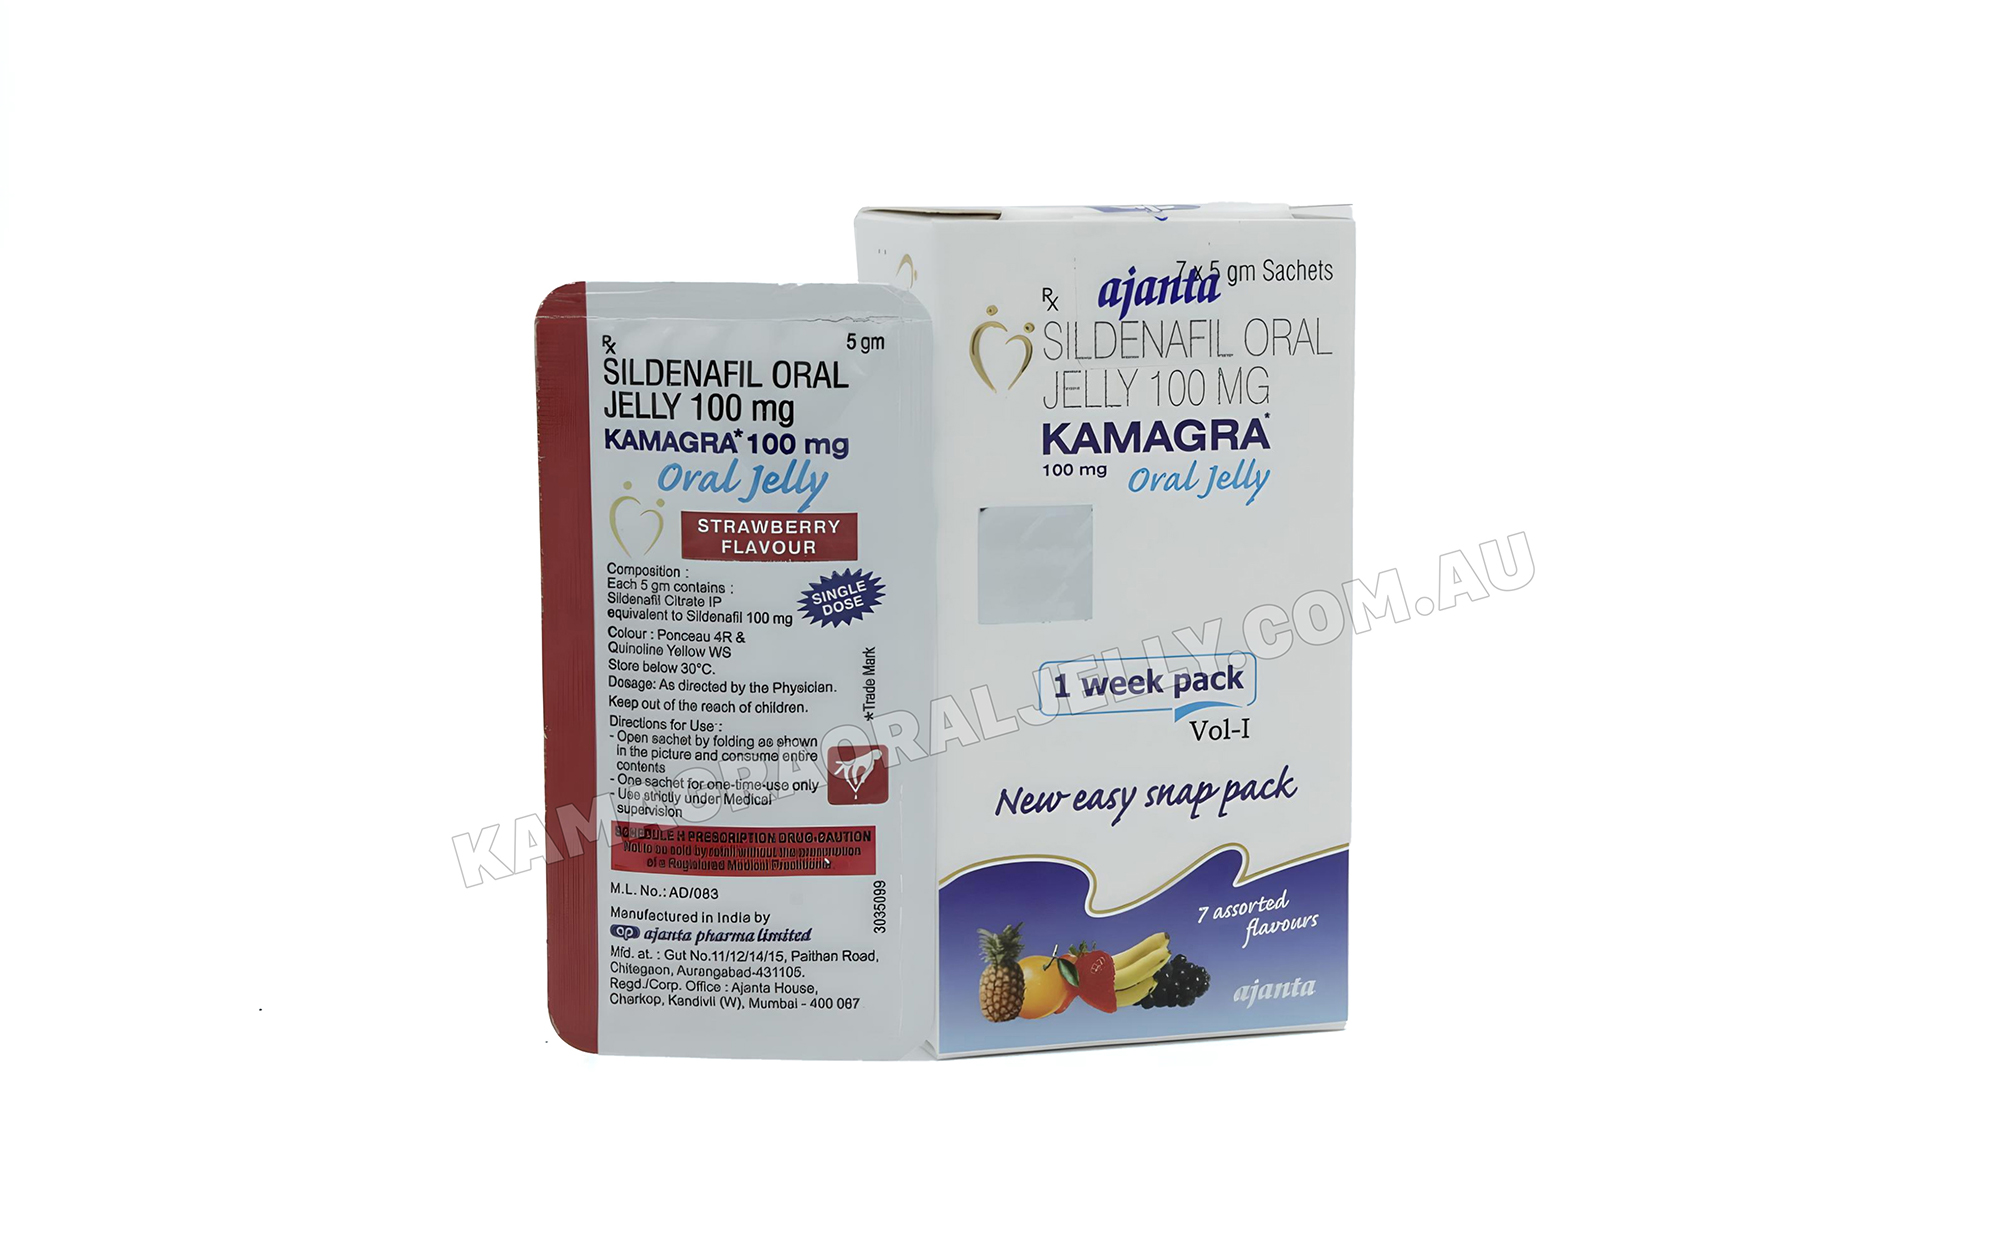 Instructions for using Kamagra Oral Jelly